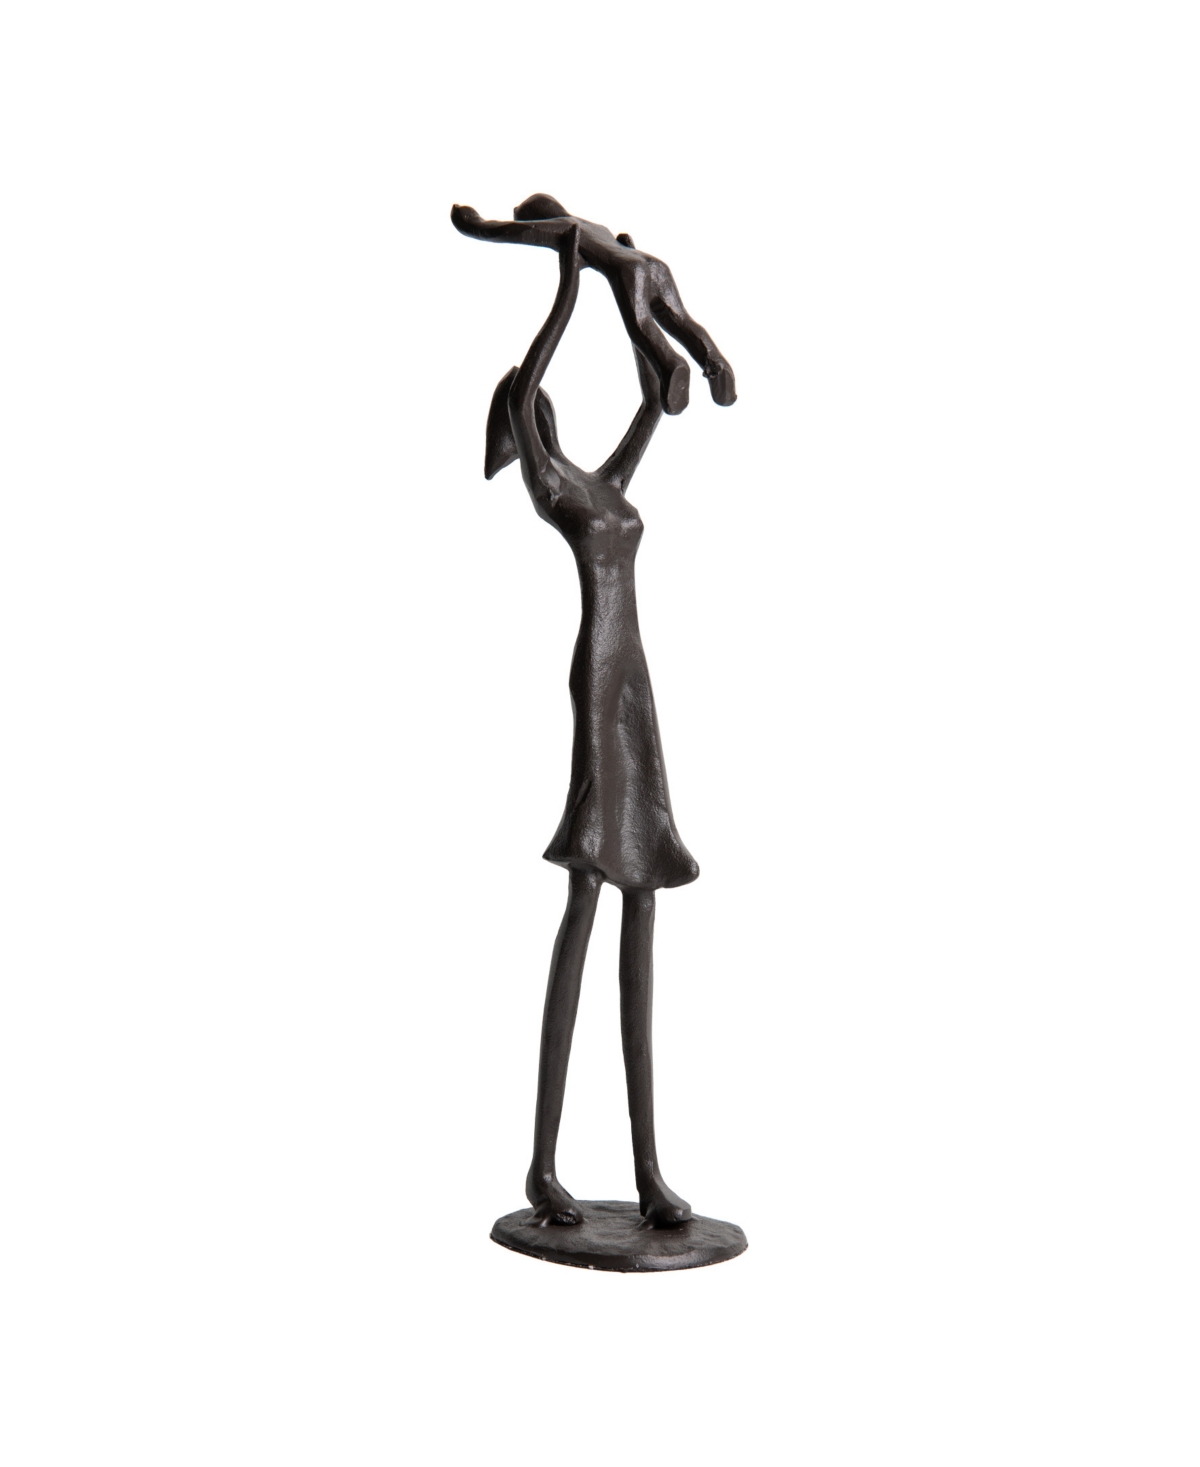 Danya B Proud Mother Lifting Child Up Contemporary Iron Sculpture Statue In Dark Brown